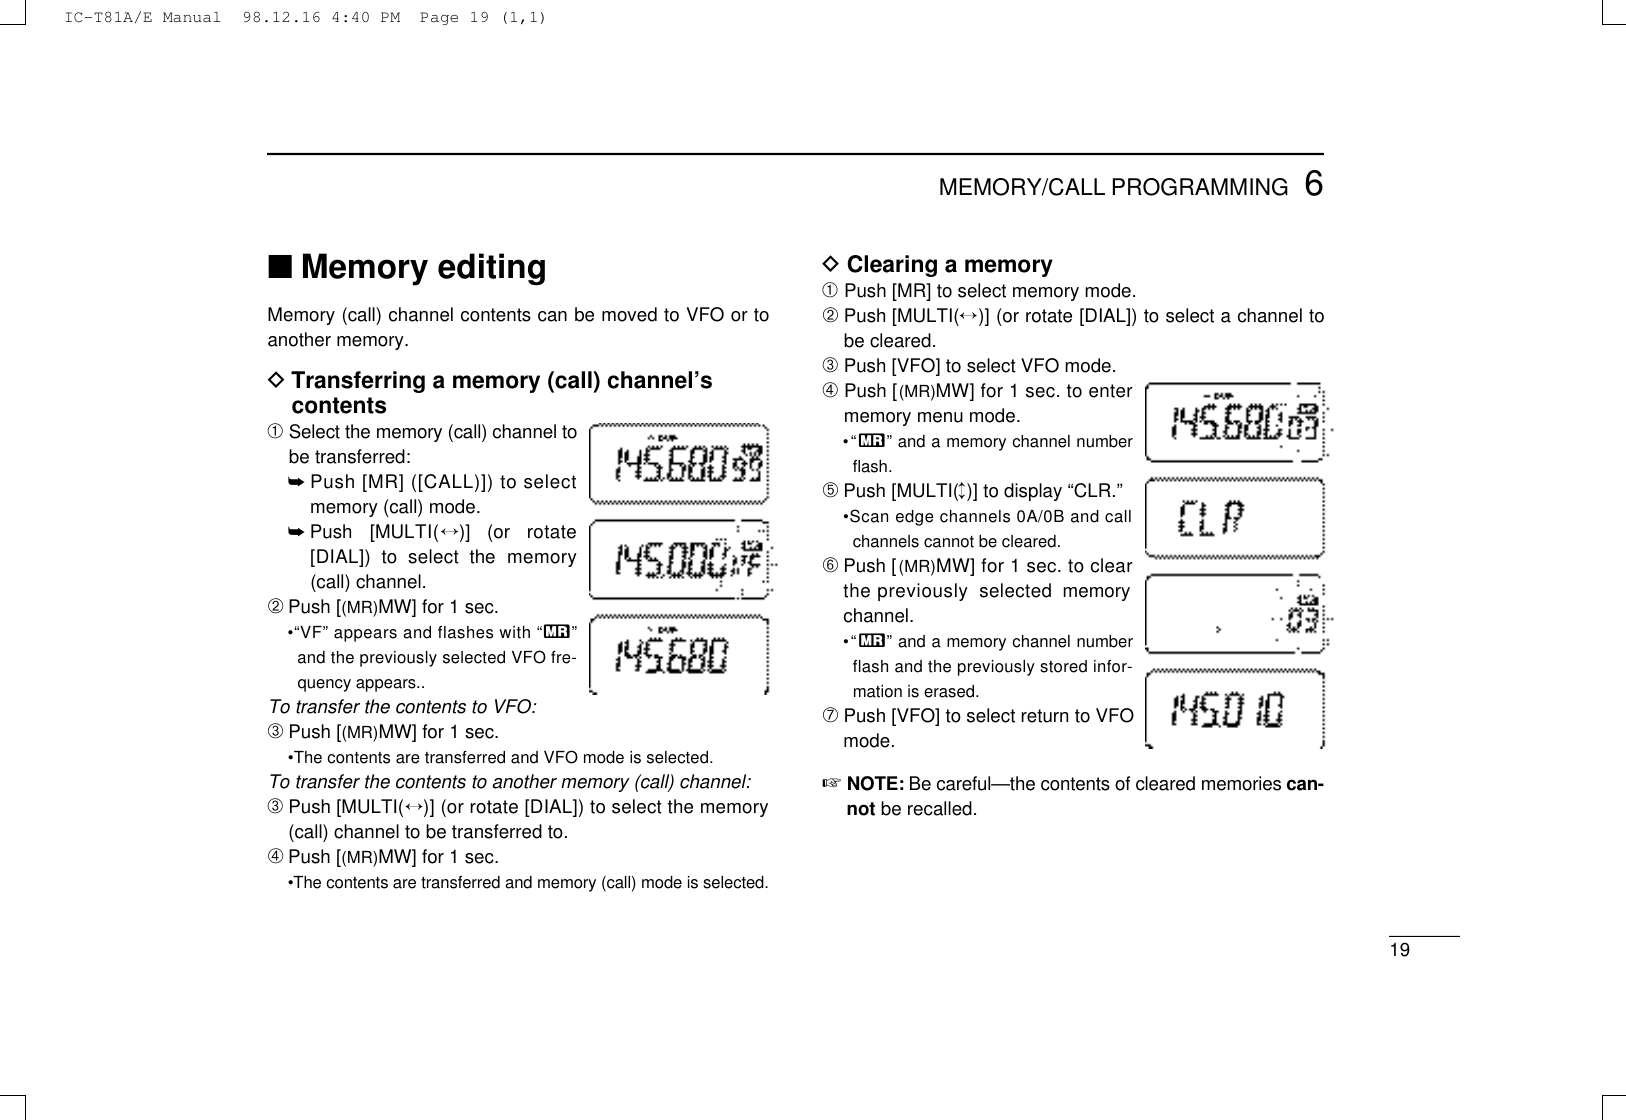 196MEMORY/CALL PROGRAMMING■Memory editingMemory (call) channel contents can be moved to VFO or toanother memory.DTransferring a memory (call) channel’scontents➀Select the memory (call) channel tobe transferred:➥Push [MR] ([CALL)]) to selectmemory (call) mode.➥Push  [MULT I (↔)]  (or  rotate[DIAL])  to  select  the  memory(call) channel.➁Push [(MR)MW] for 1 sec.•“VF” appears and flashes with “X”and the previously selected VFO fre-quency appears..To transfer the contents to VFO:➂Push [(MR)MW] for 1 sec.•The contents are transferred and VFO mode is selected.To transfer the contents to another memory (call) channel:➂Push [MULT I (↔)] (or rotate [DIAL]) to select the memory(call) channel to be transferred to.➃Push [(MR)MW] for 1 sec.•The contents are transferred and memory (call) mode is selected.DClearing a memory➀Push [MR] to select memory mode.➁Push [MULTI(↔)] (or rotate [DIAL]) to select a channel tobe cleared.➂Push [VFO] to select VFO mode.➃Push [( M R )MW] for 1 sec. to entermemory menu mode.•“X” and a memory channel numberﬂash.➄Push [MULTI(↕)] to display “CLR.”•Scan edge channels 0A/0B and callchannels cannot be cleared.➅Push [( M R )MW] for 1 sec. to clearthe previously  selected  memorychannel.•“X” and a memory channel numberflash and the previously stored infor-mation is erased.➆Push [VFO] to select return to VFOmode.☞N O T E : Be careful—the contents of cleared memories c a n-not be recalled.IC-T81A/E Manual  98.12.16 4:40 PM  Page 19 (1,1)